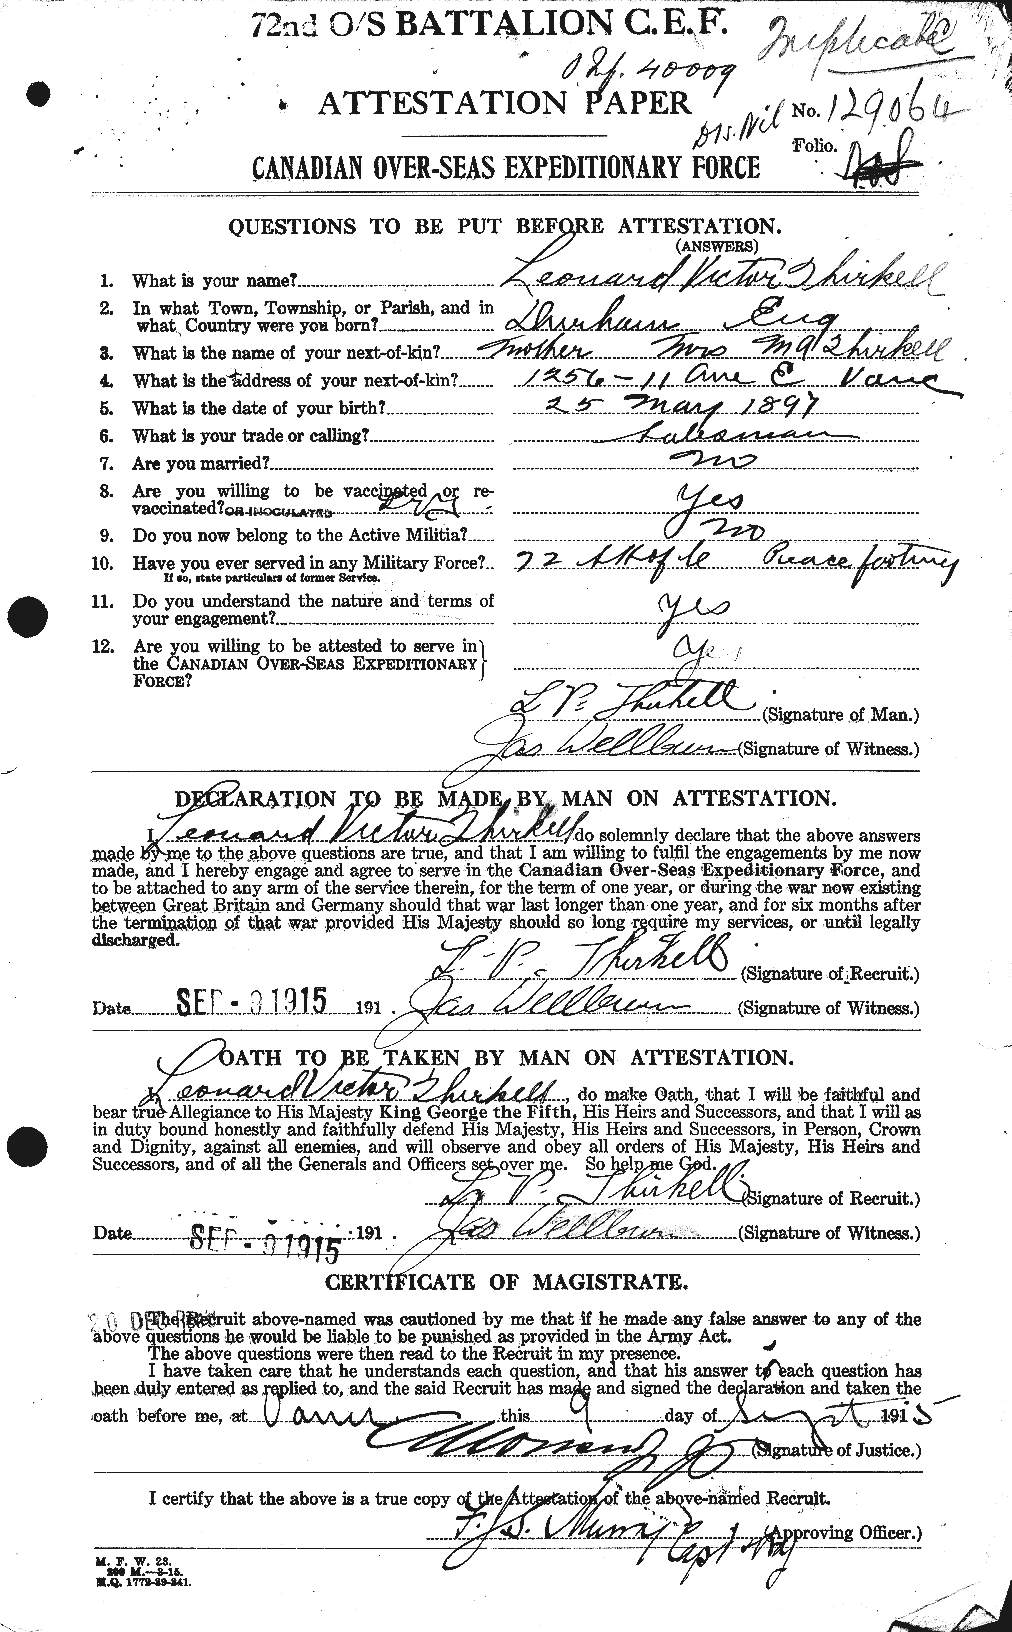 Personnel Records of the First World War - CEF 632055a